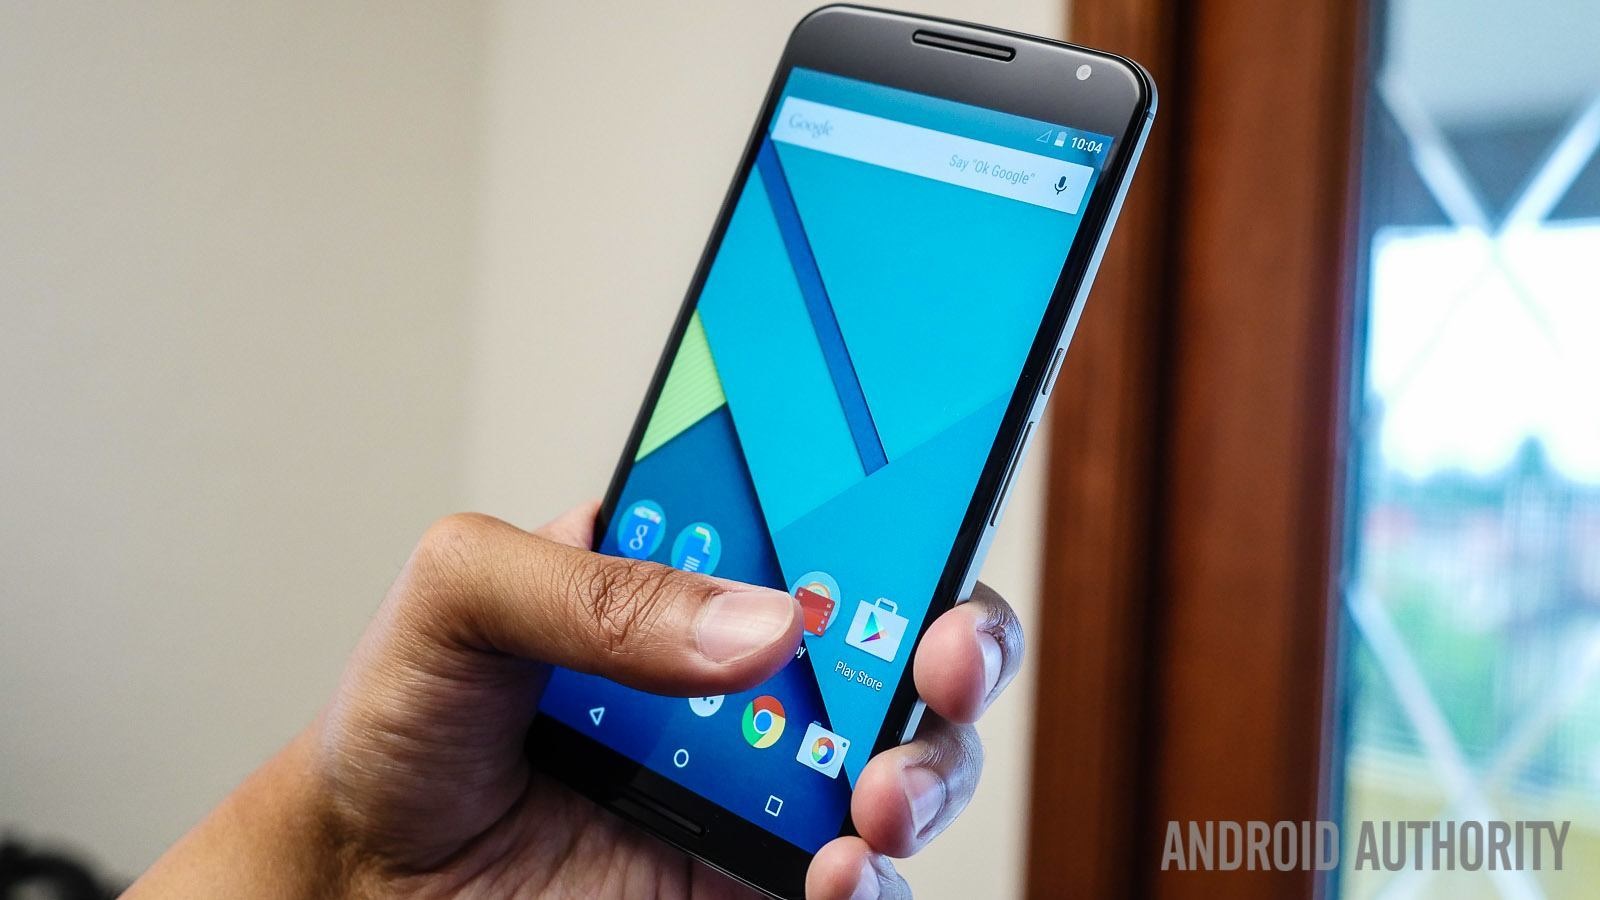 A Nexus 6 smartphone in a person's hand with blue wallpaper.